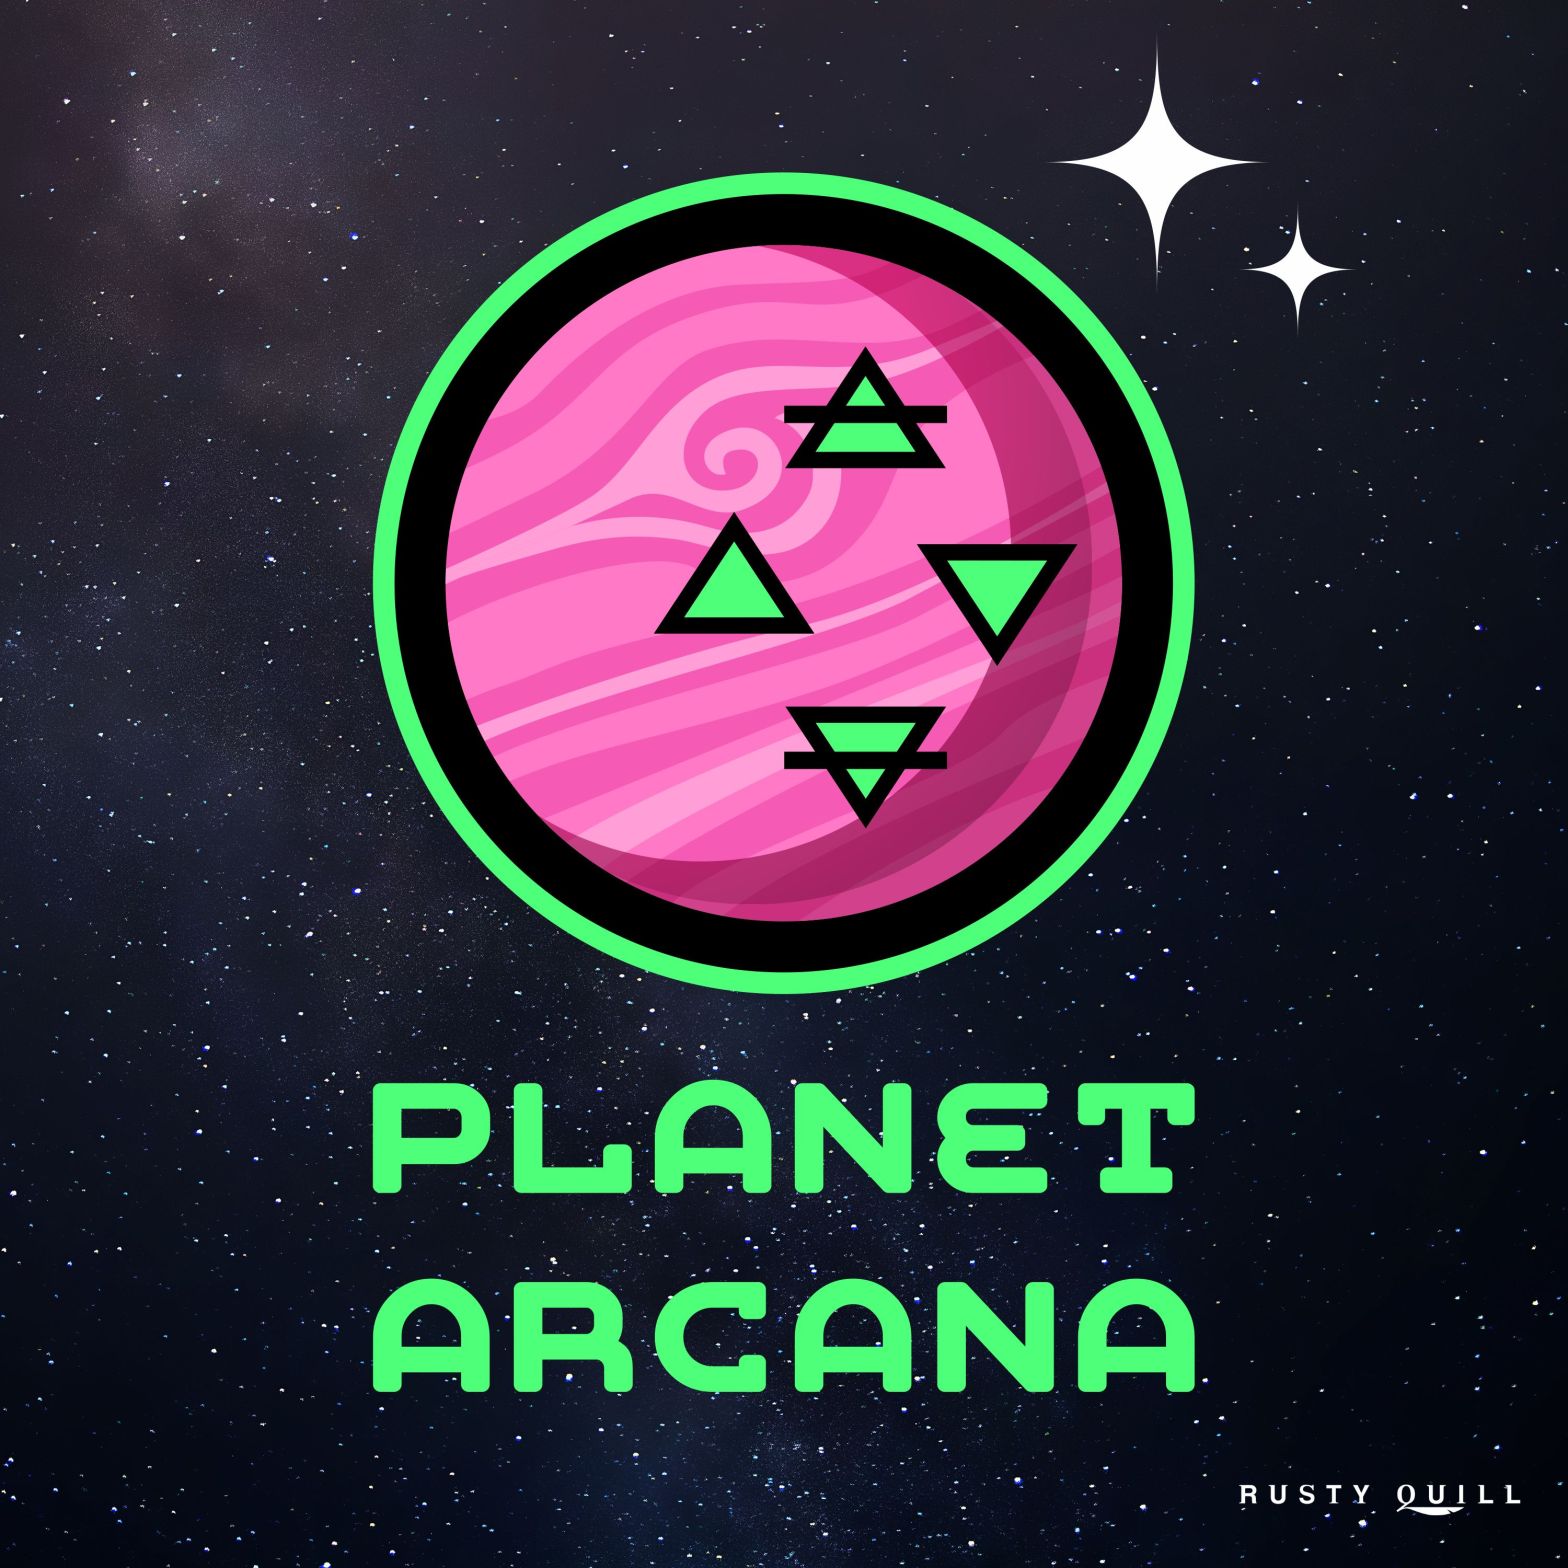 Show cover art, back ground is a field of stars and space, there are 2 bright starts top right of the image, and in the center is a pink planet surrounded by a black and then a green circle. There are 4 green triangles on the surface of the planet laid out like a compass. Below the planet is in green writing is "PLANET ARCANA".